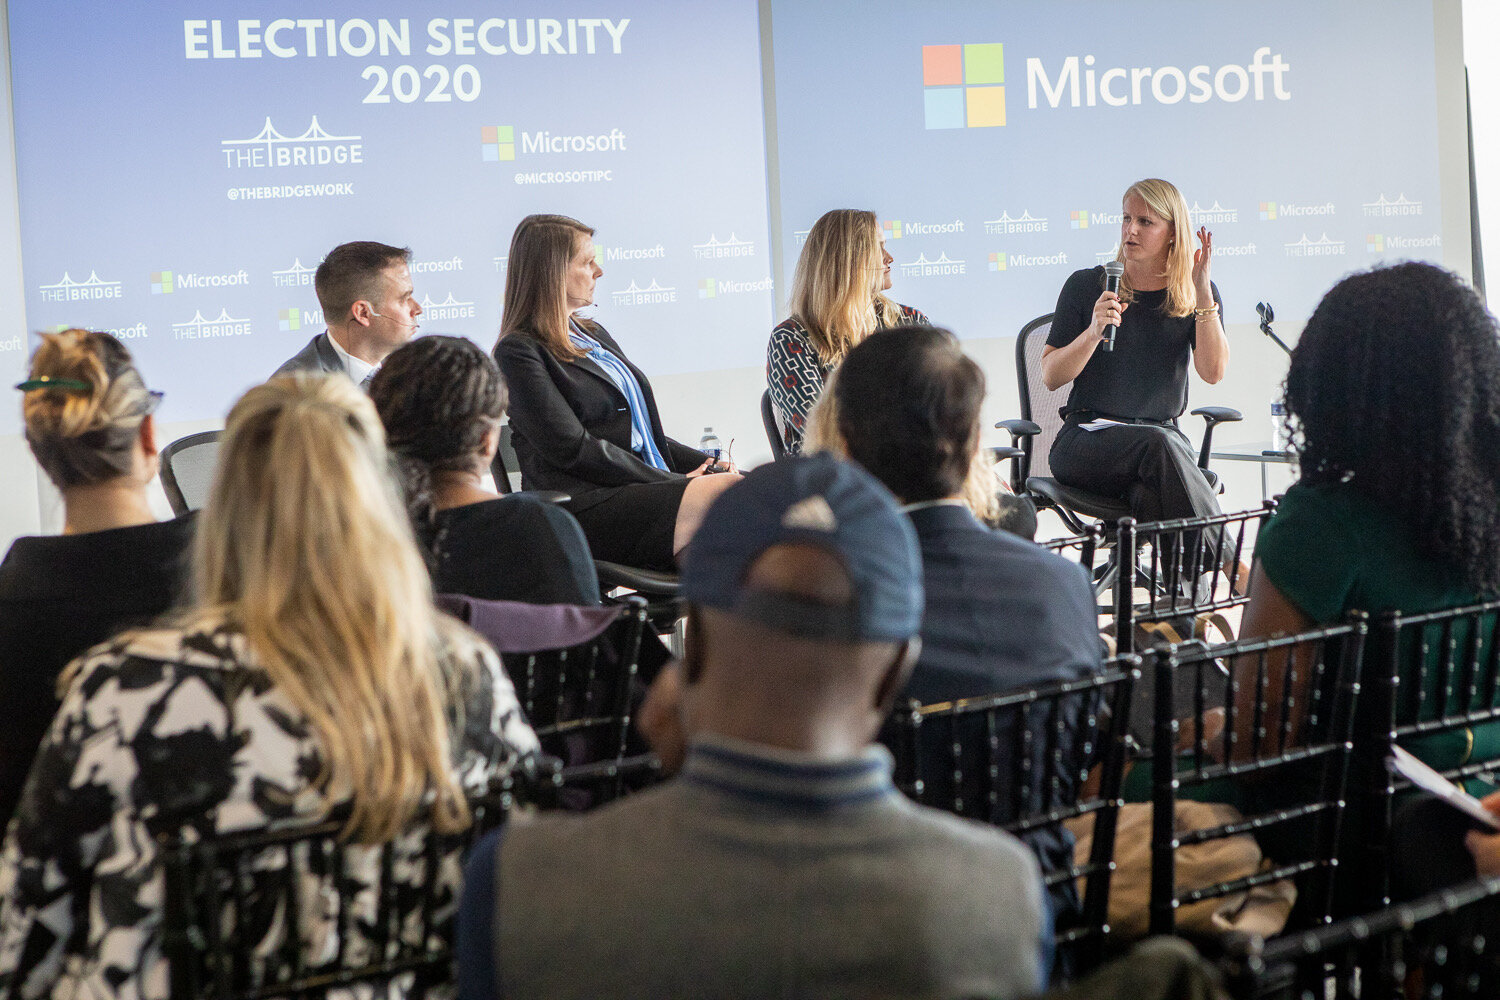 TheBridge and Microsoft Election Security Discussion 